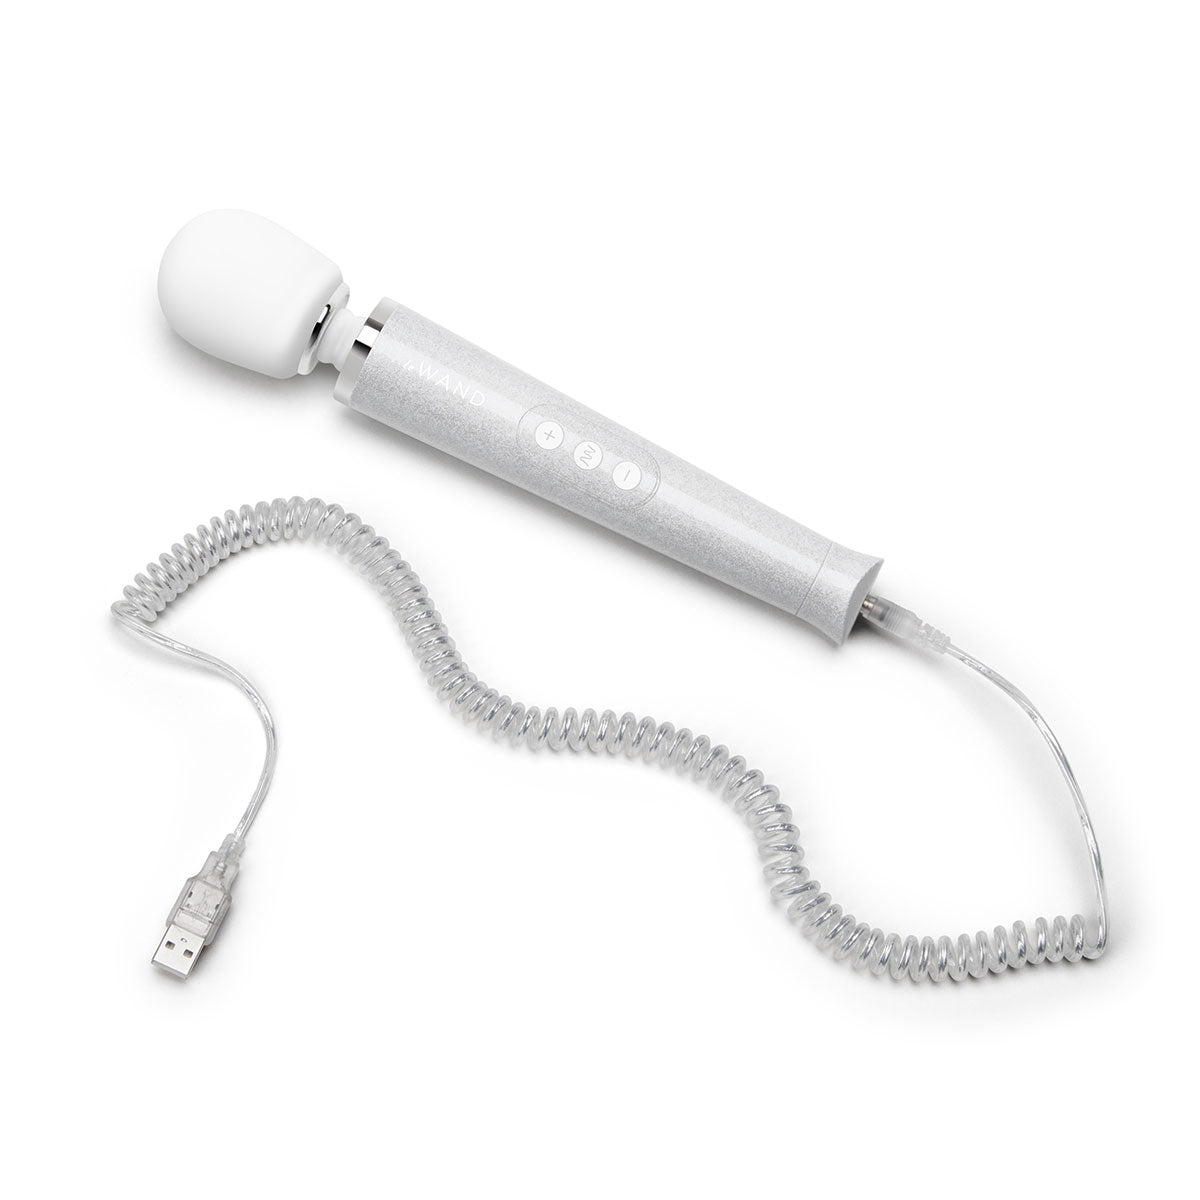 Le Wand Massager - All That Glimmers White Intimates Adult Boutique